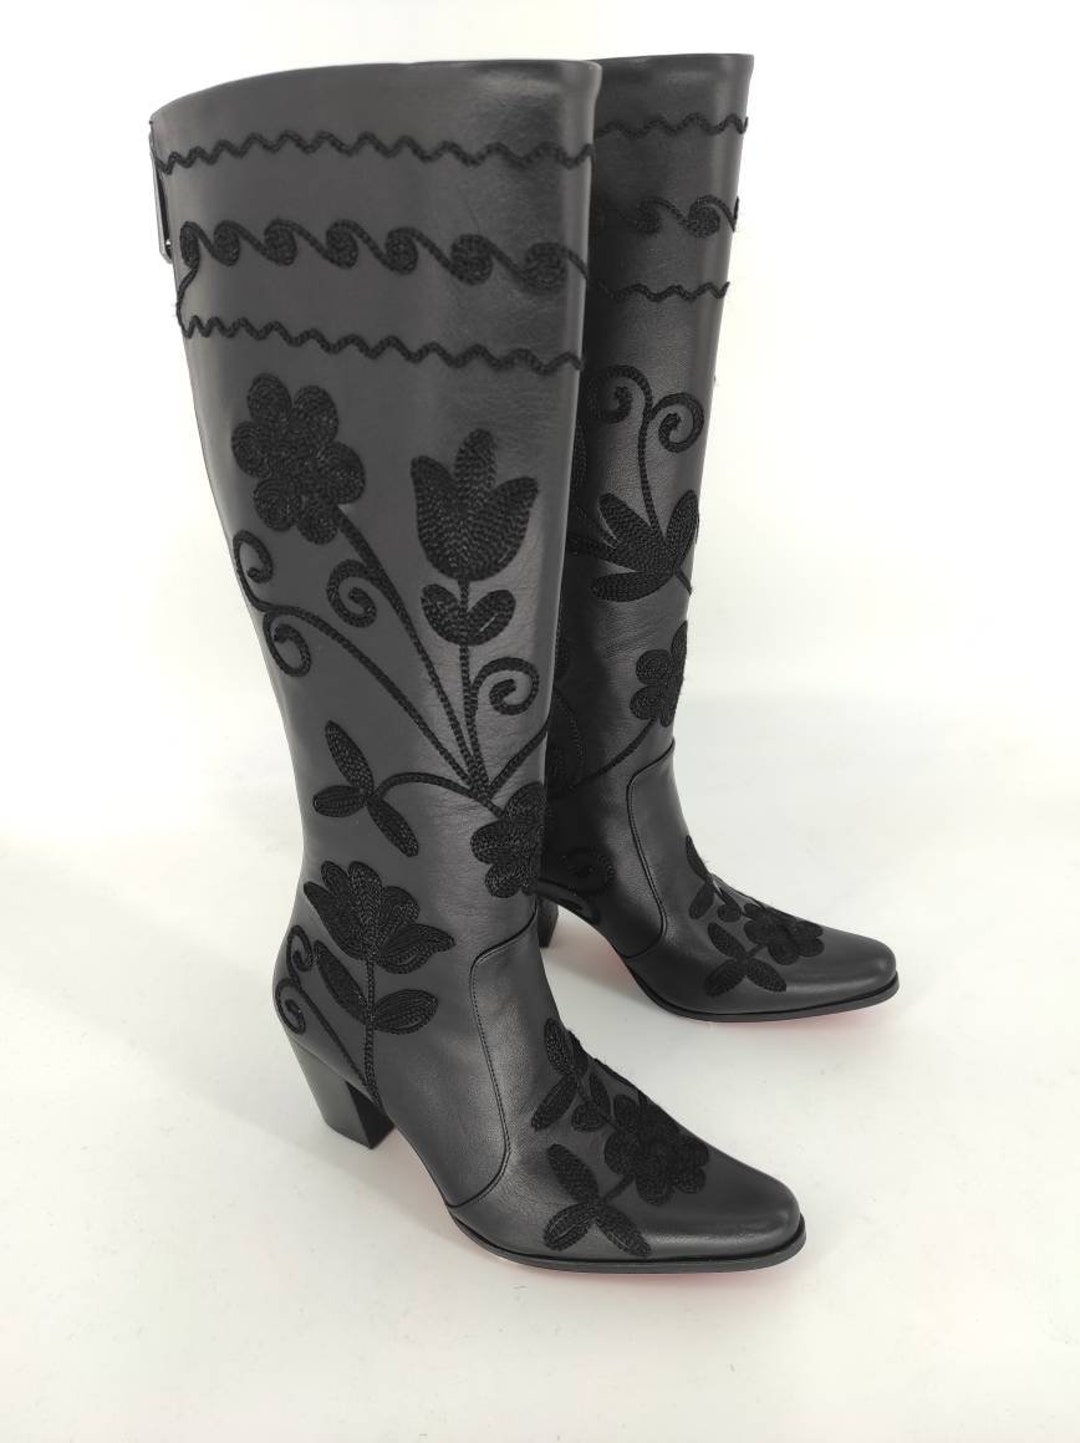 Cowboy Boots Custom Boots Suzani Boots Genuine Leather - Etsy